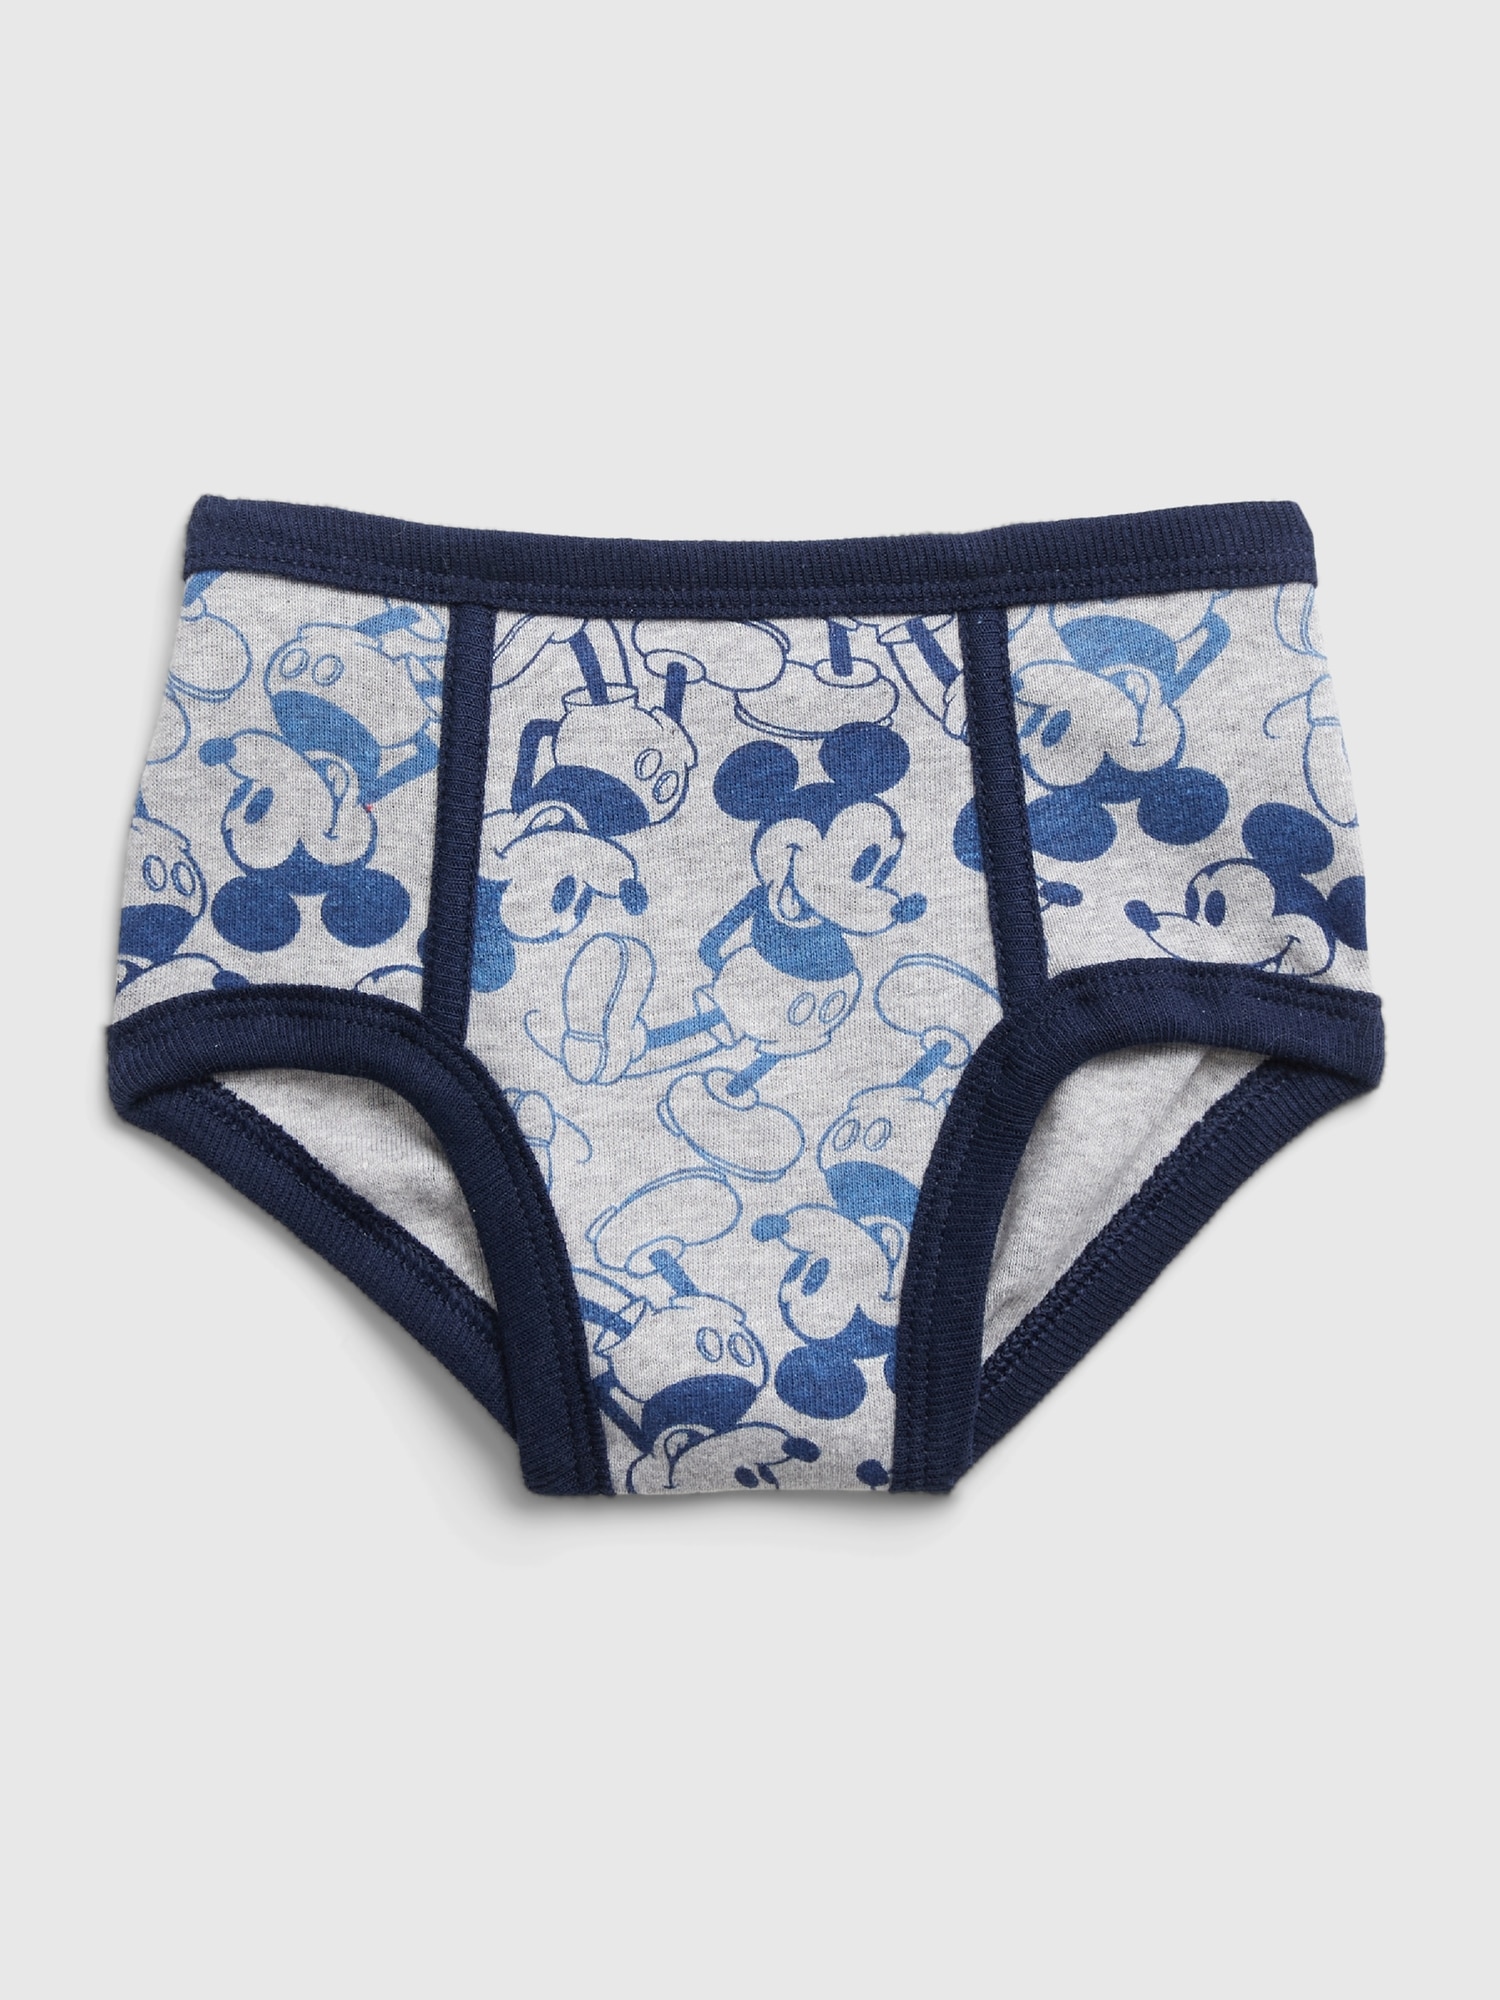 Buy Disney Mickey Mouse Boys Potty Training Pants Underwear Toddler 7-Pack  Size 3T at